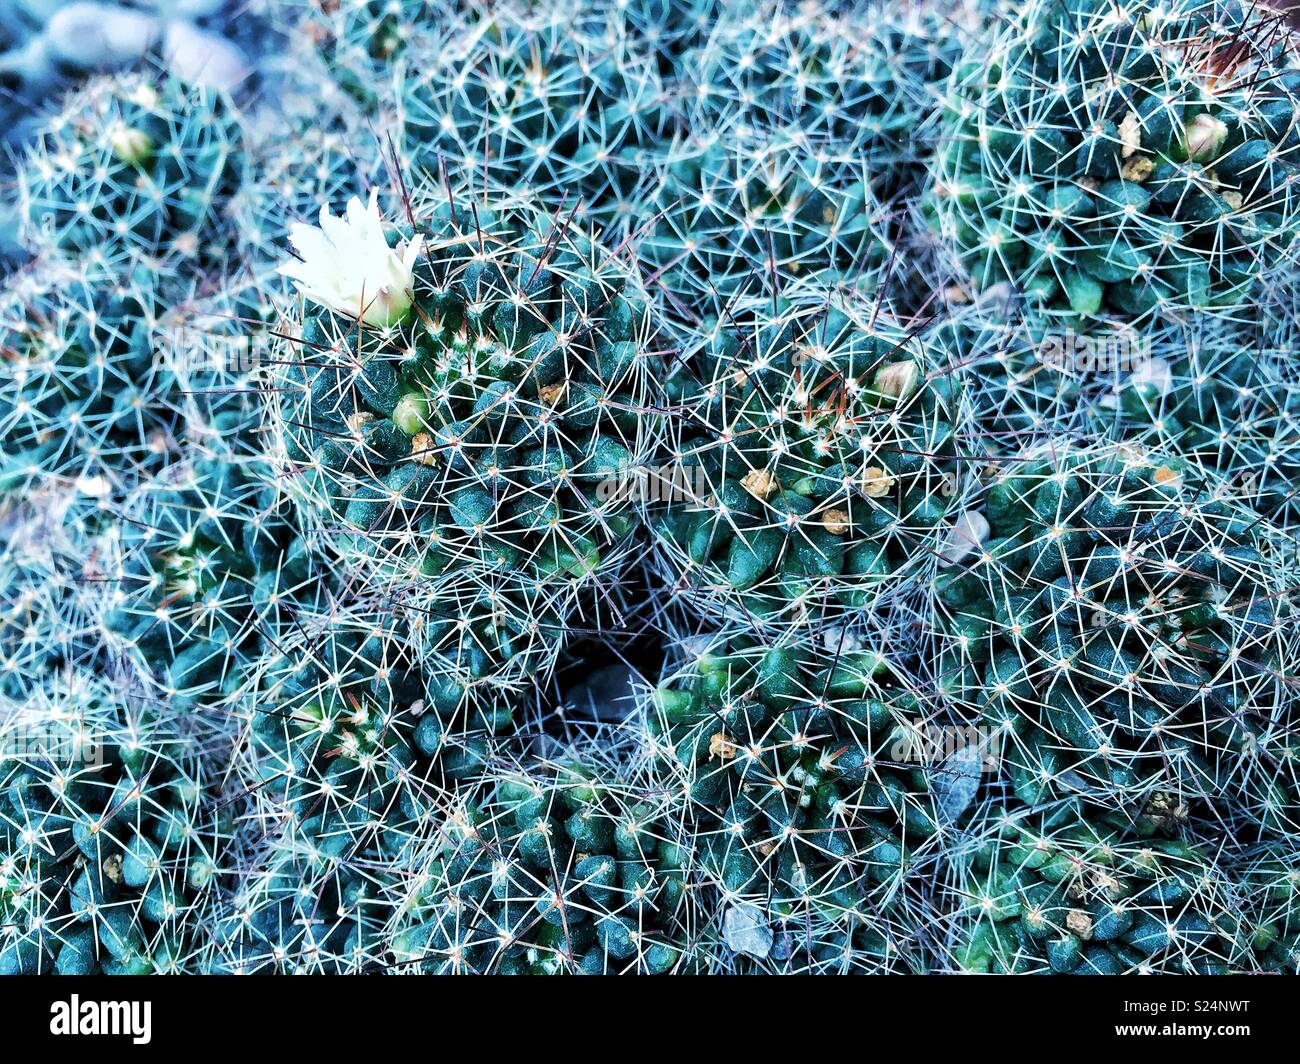 Single flower blooms on top of Dangerous prickly plants cacti succulents Stock Photo